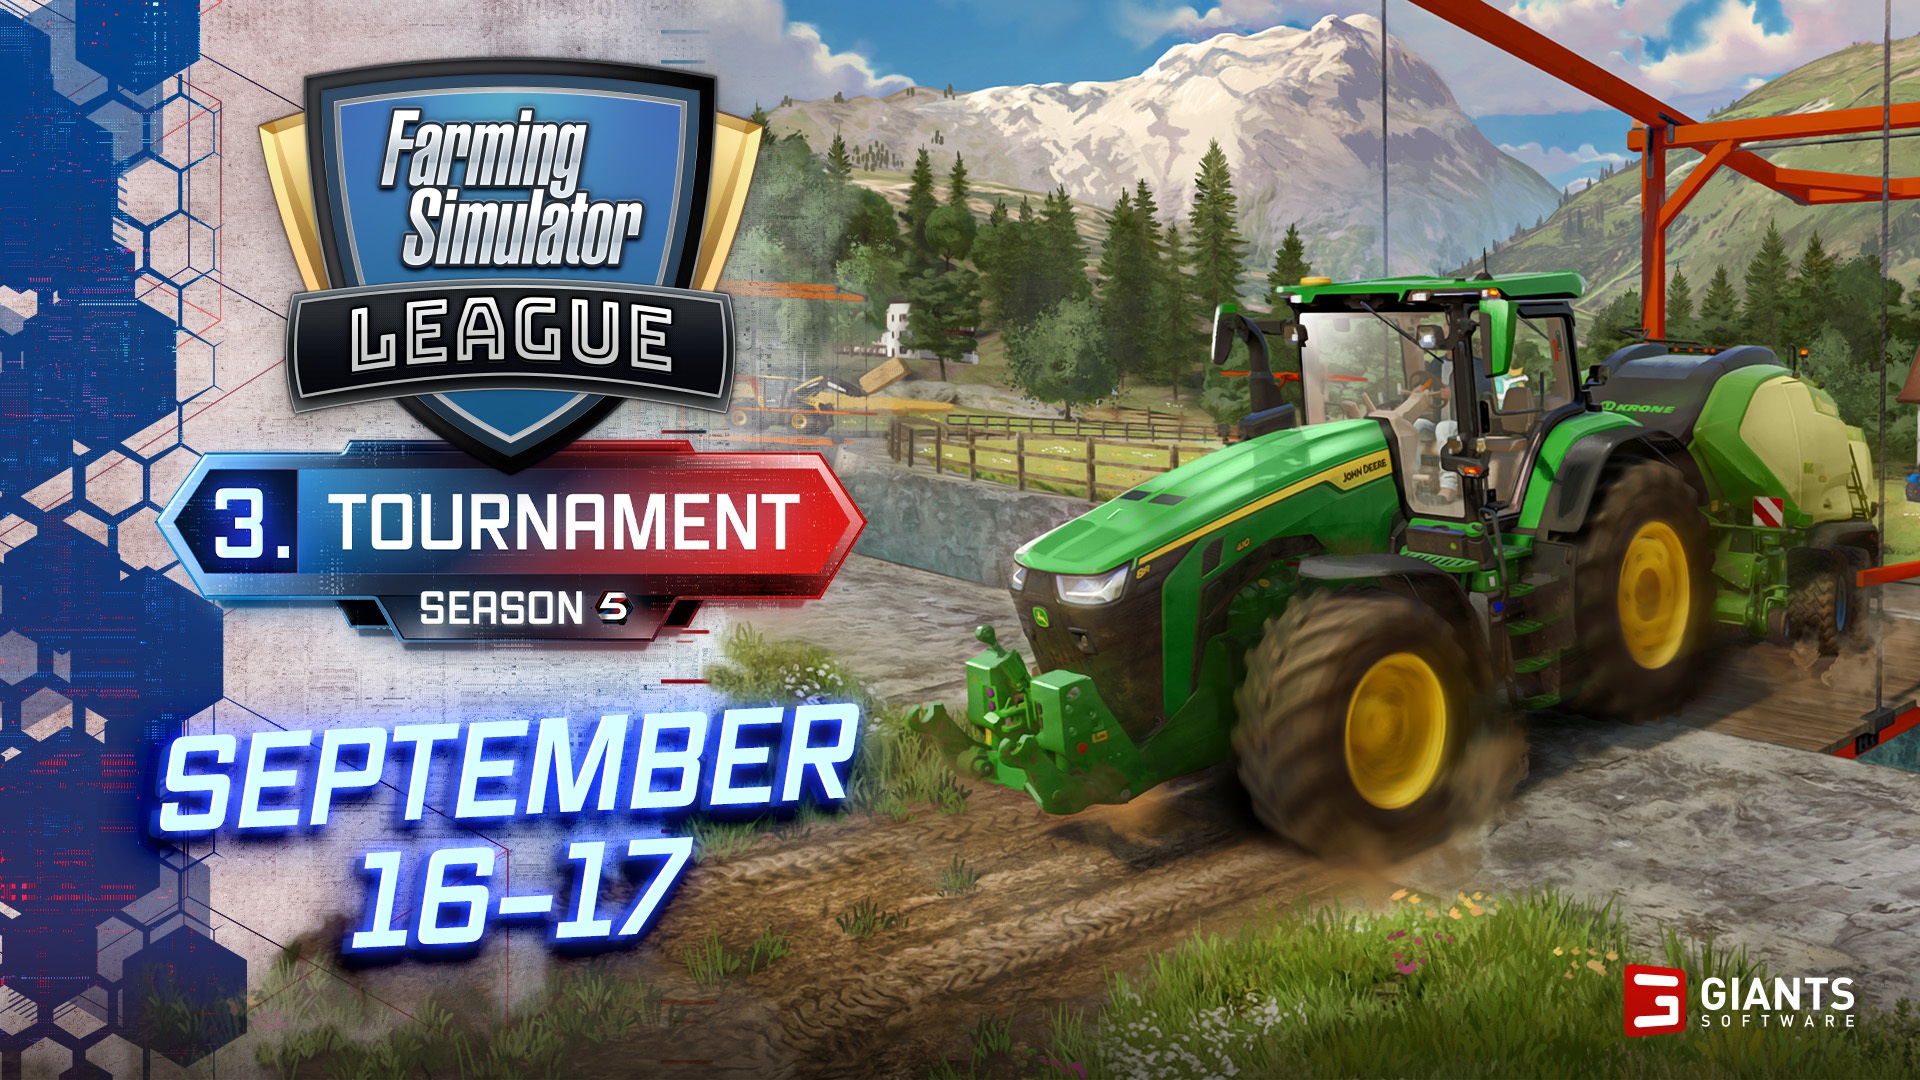 Farming Simulator League Competition This Weekend